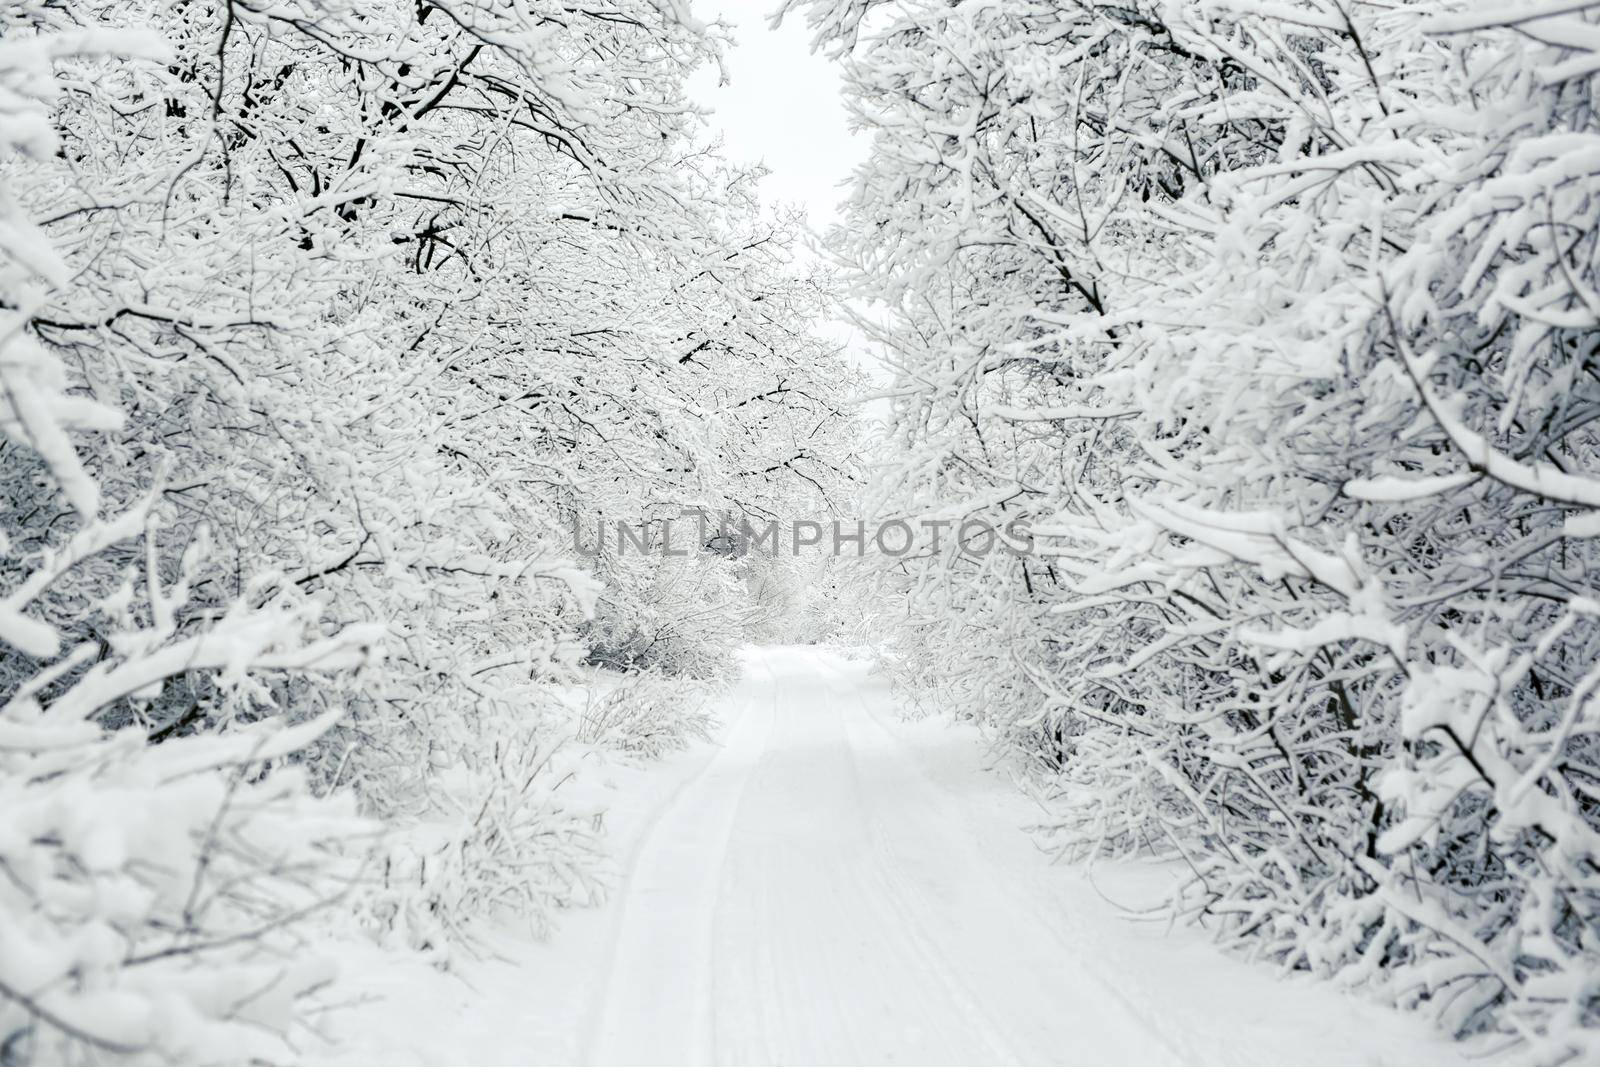 The road through the winter snow forest. Winter snow road in forest.